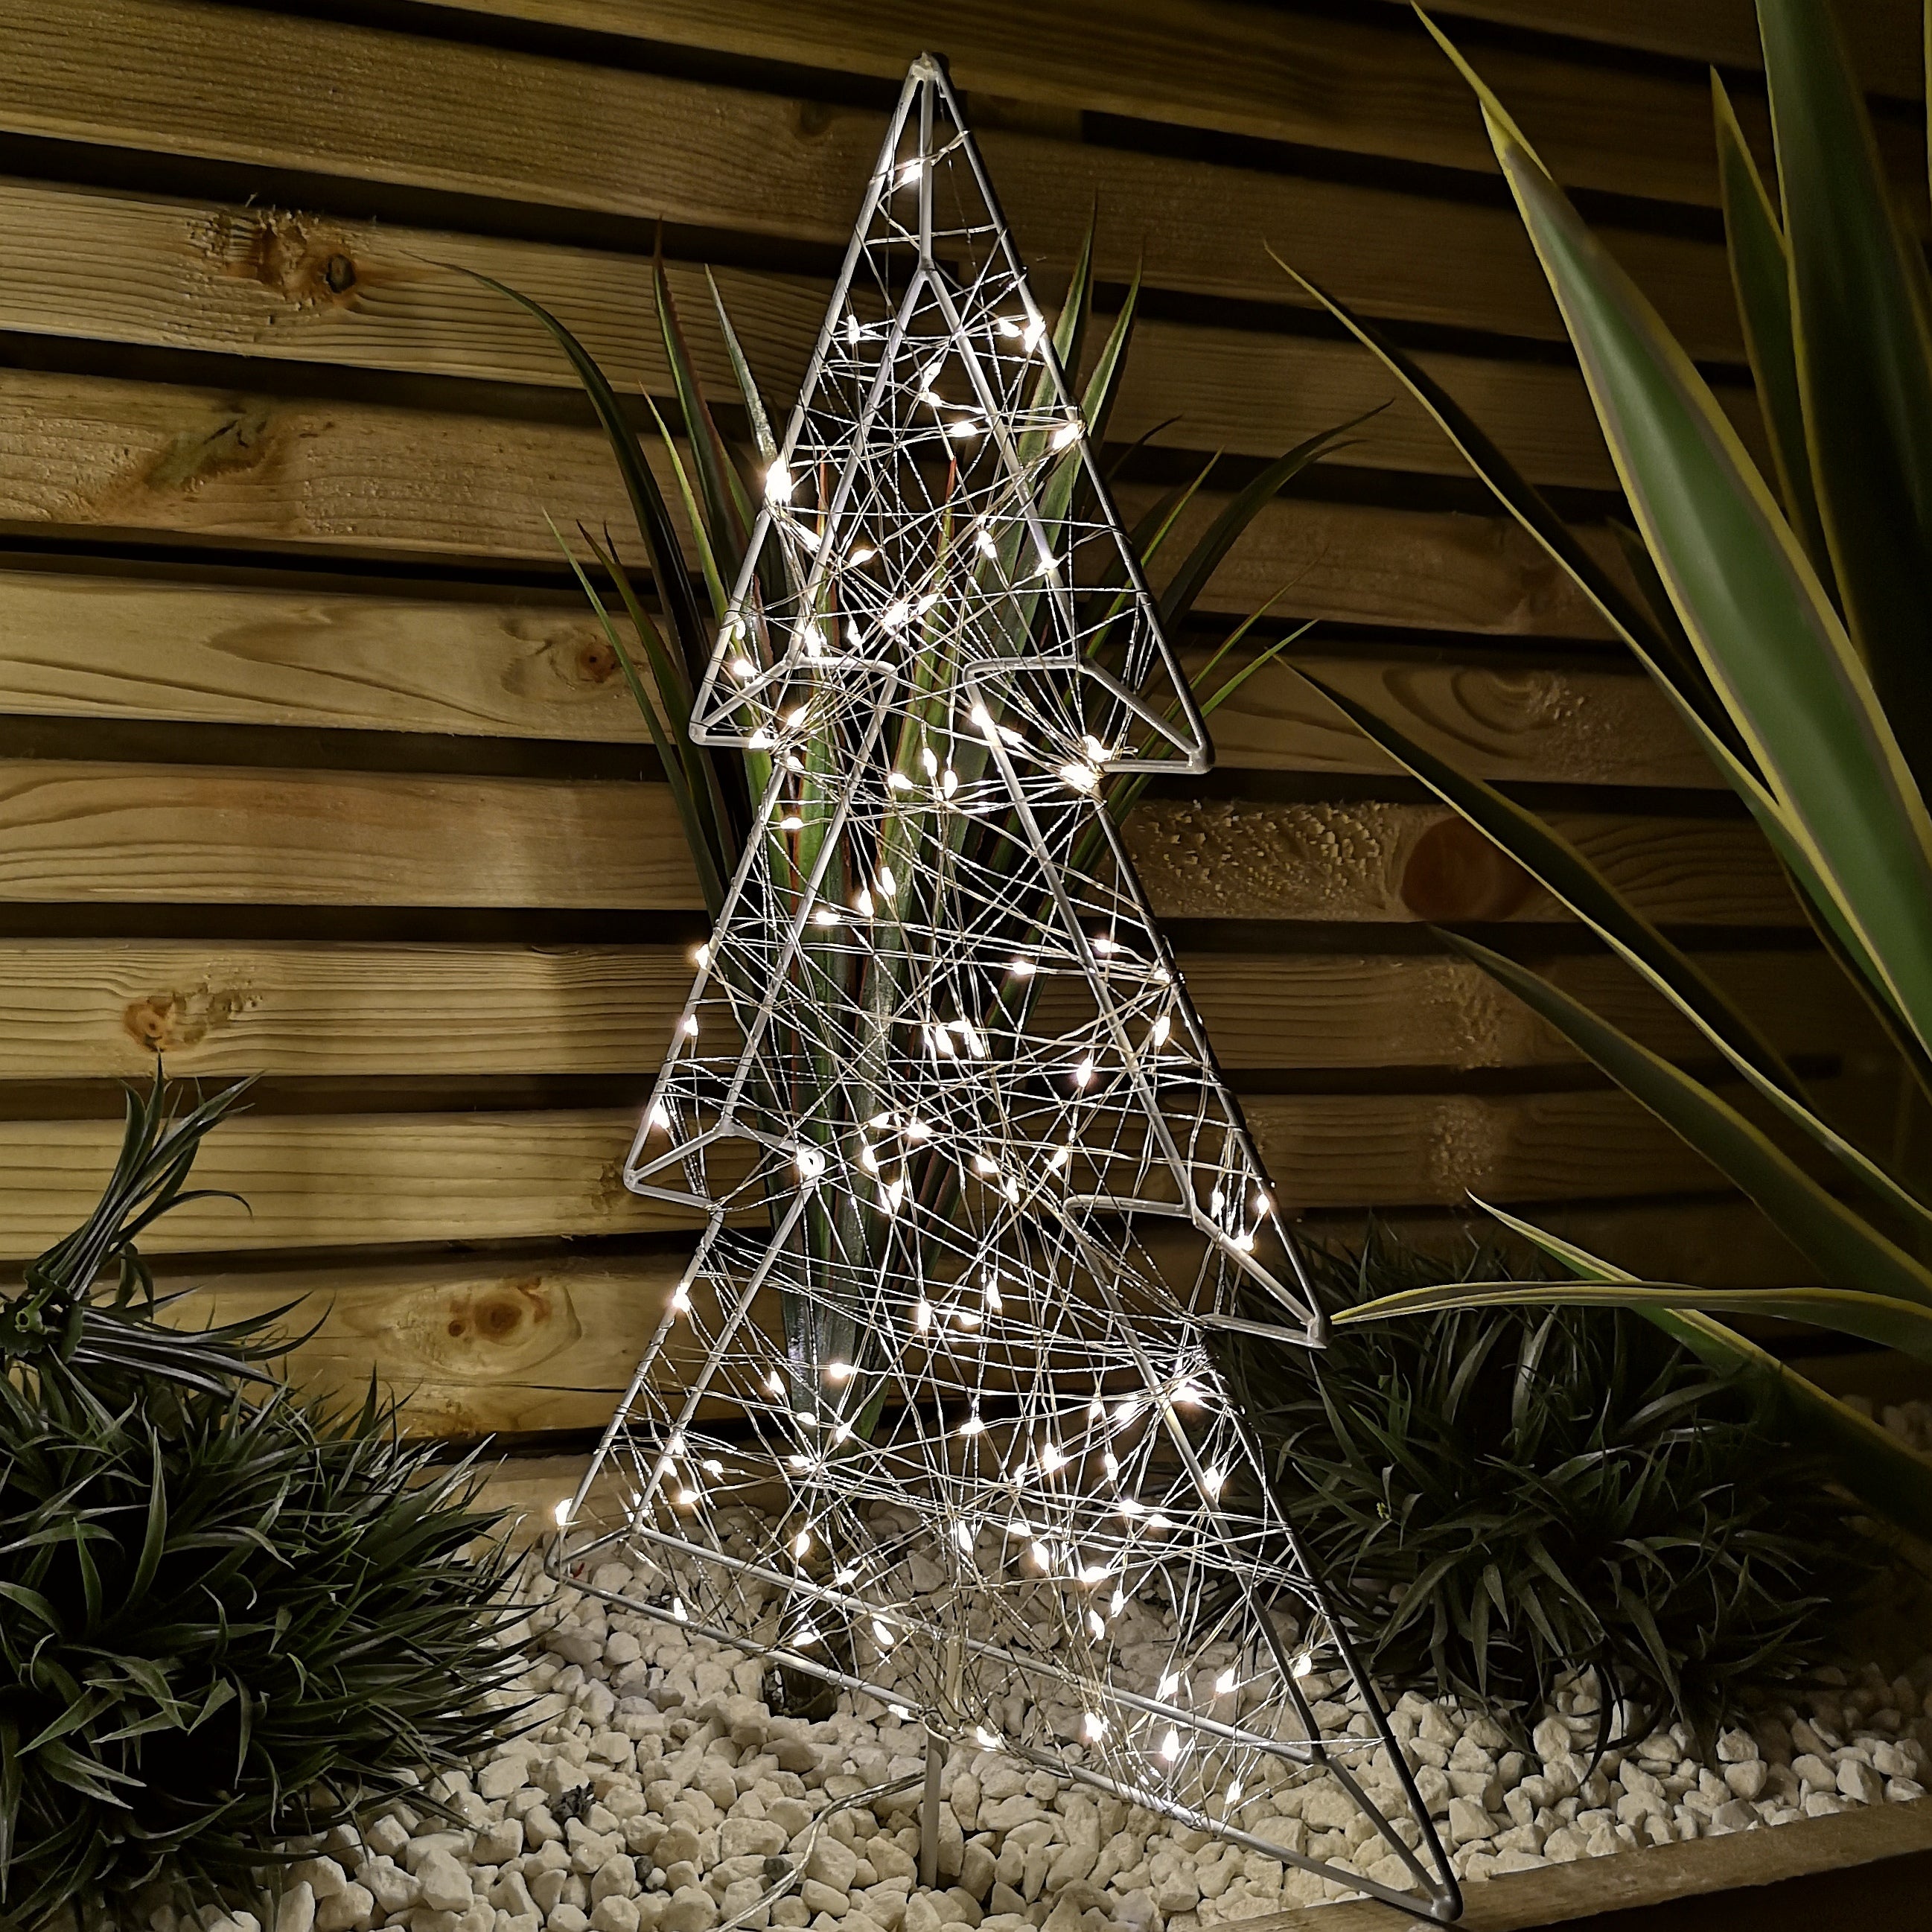 Set of 3 50cm Light up Iron Christmas Tree Garden Stake Lights with Warm White LEDs